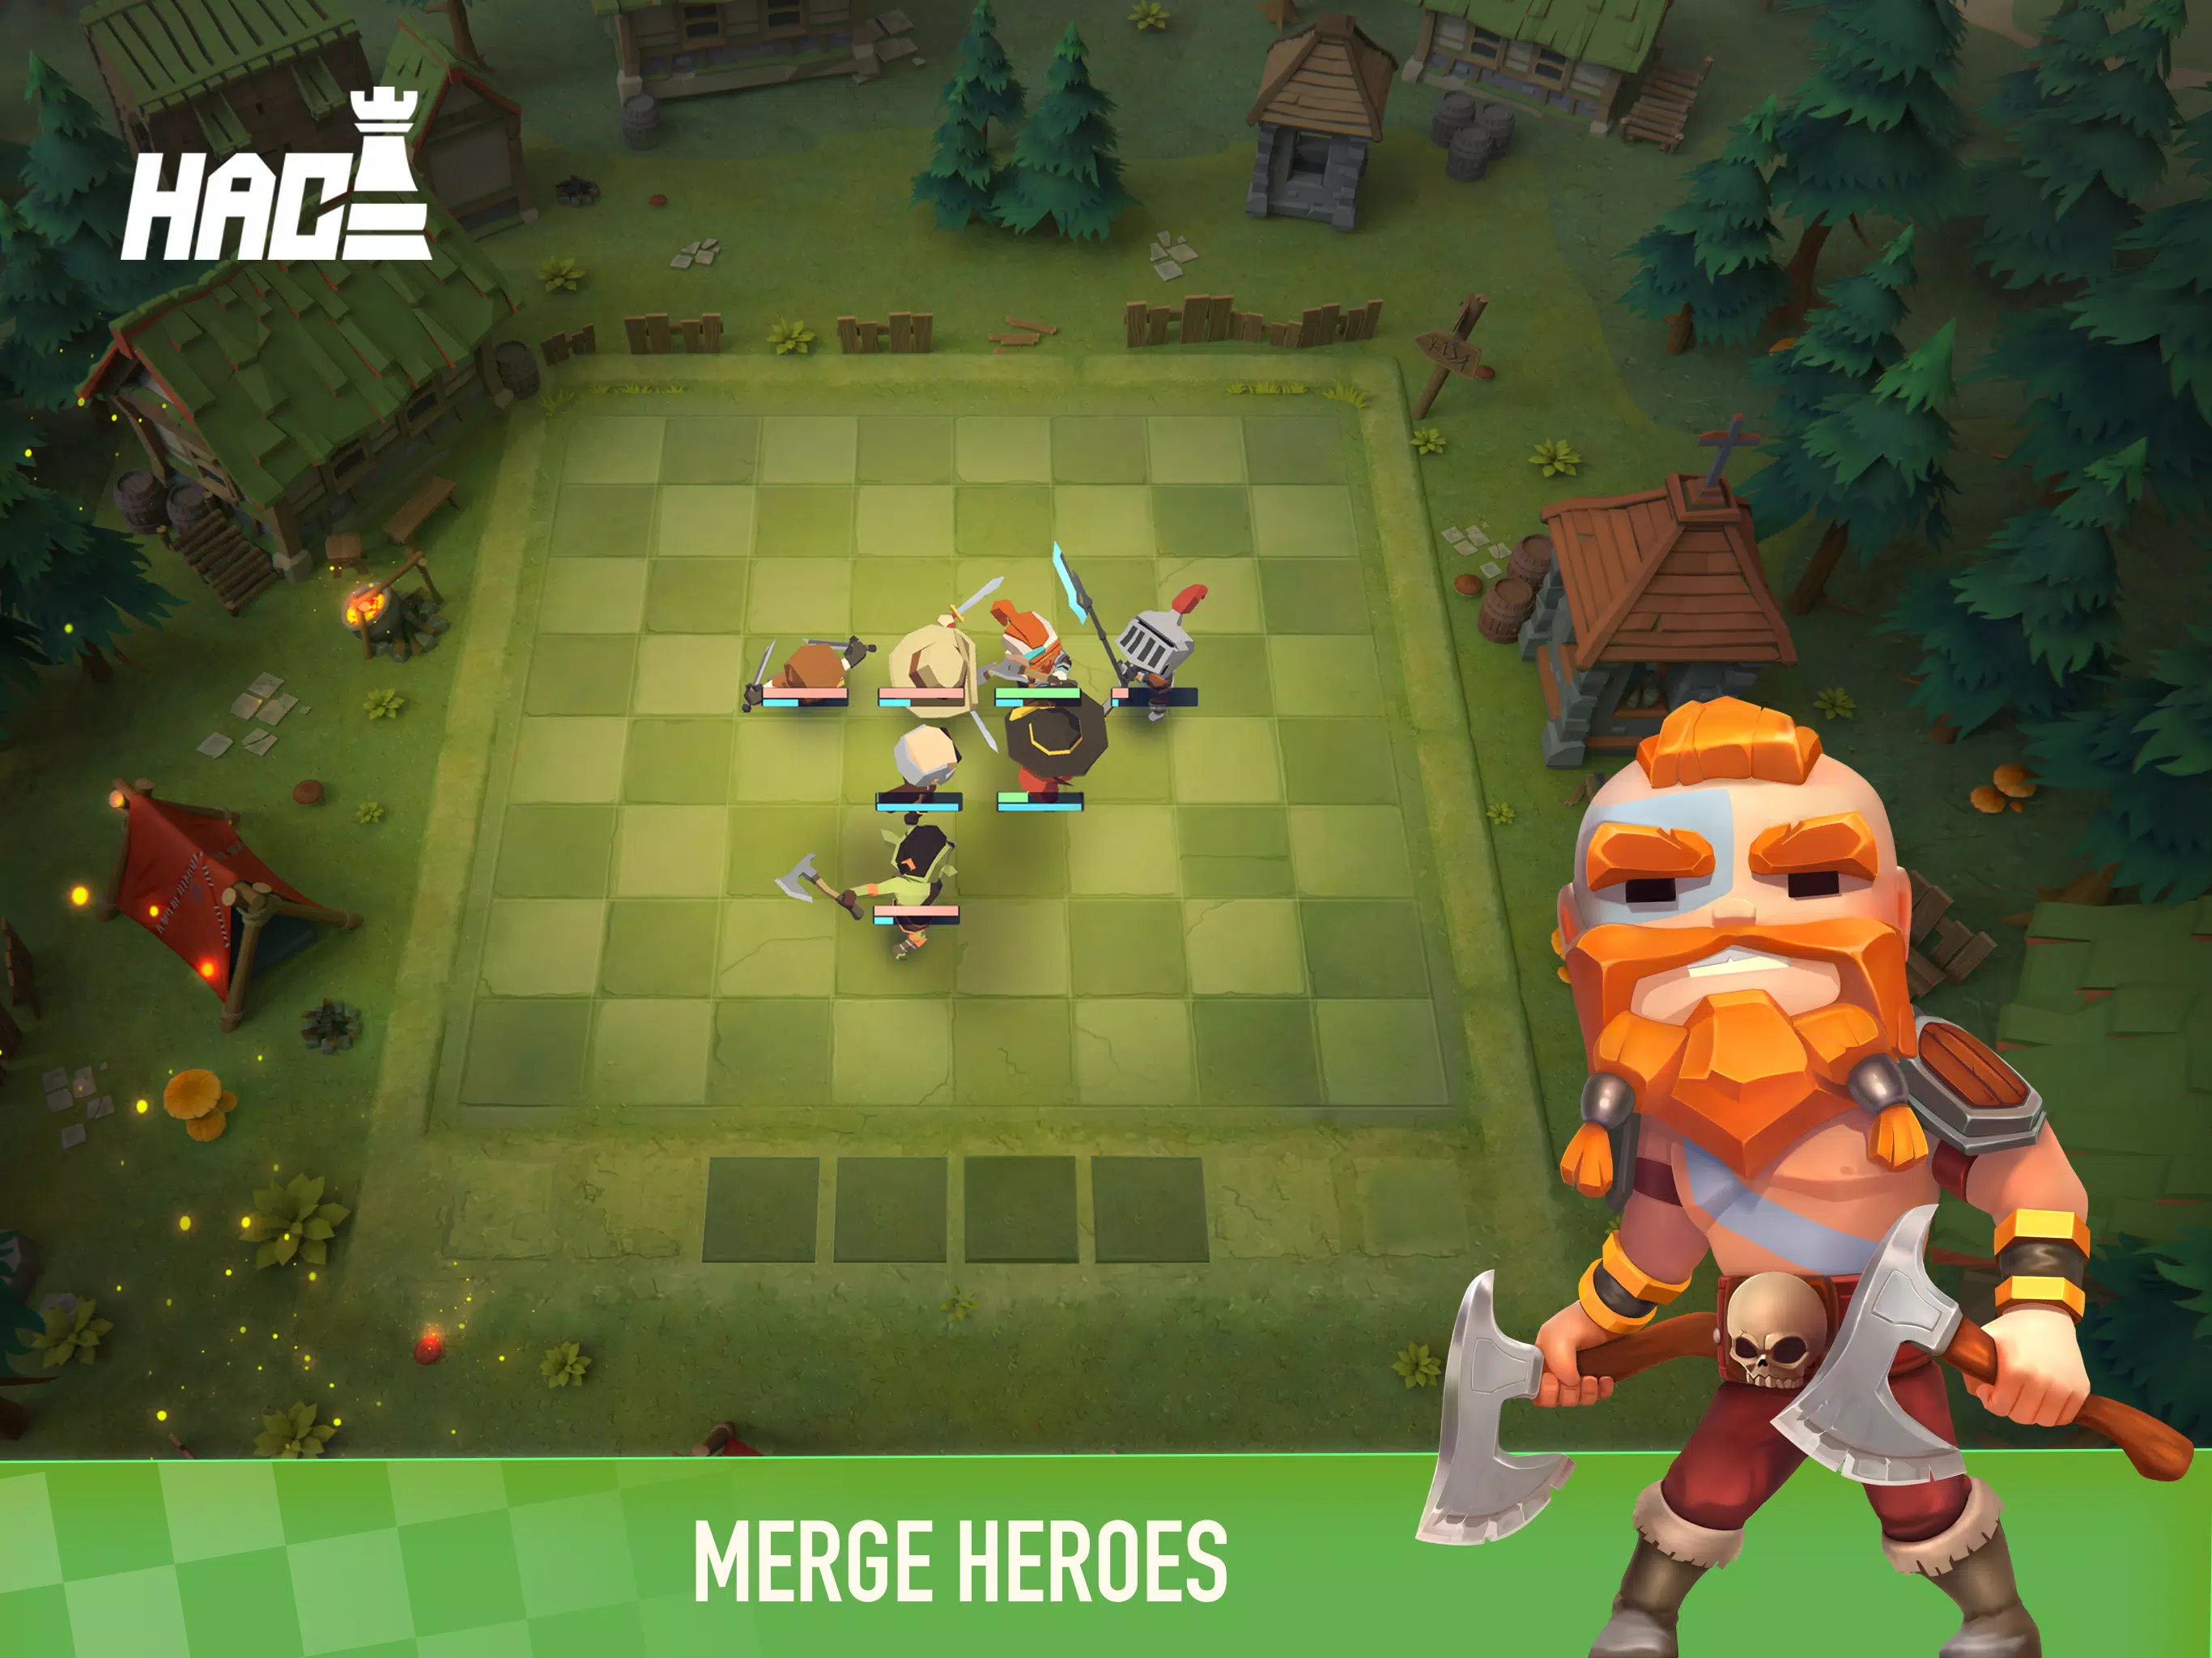 Auto Chess  Download and Play for Free - Epic Games Store